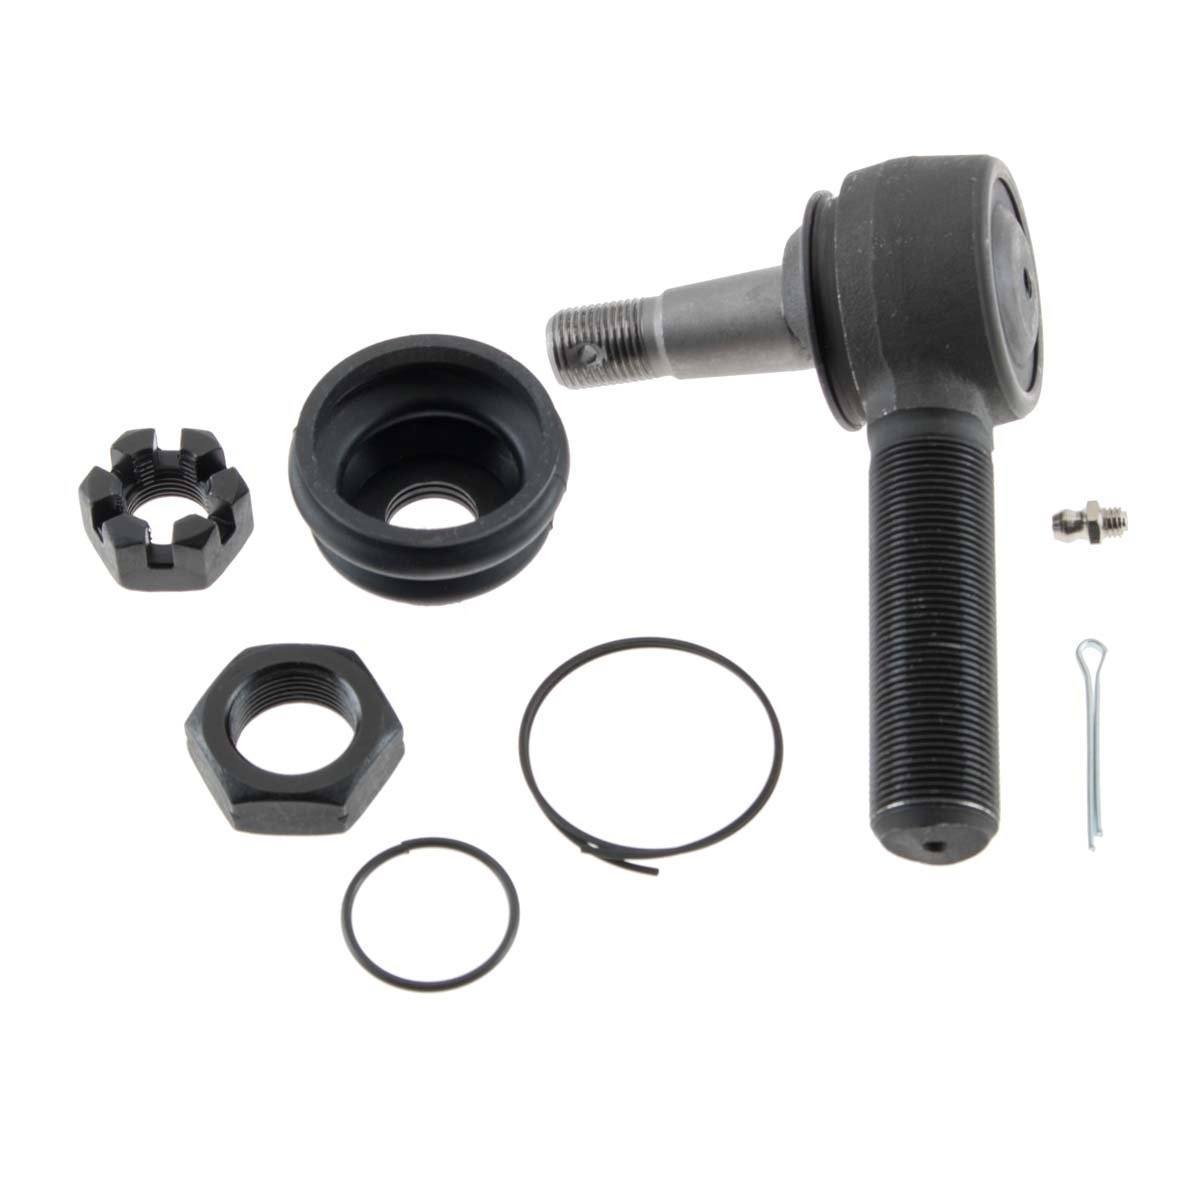 '18-23 Jeep JL Heavy Duty Tie Rod Kit Suspension Synergy Manufacturing parts